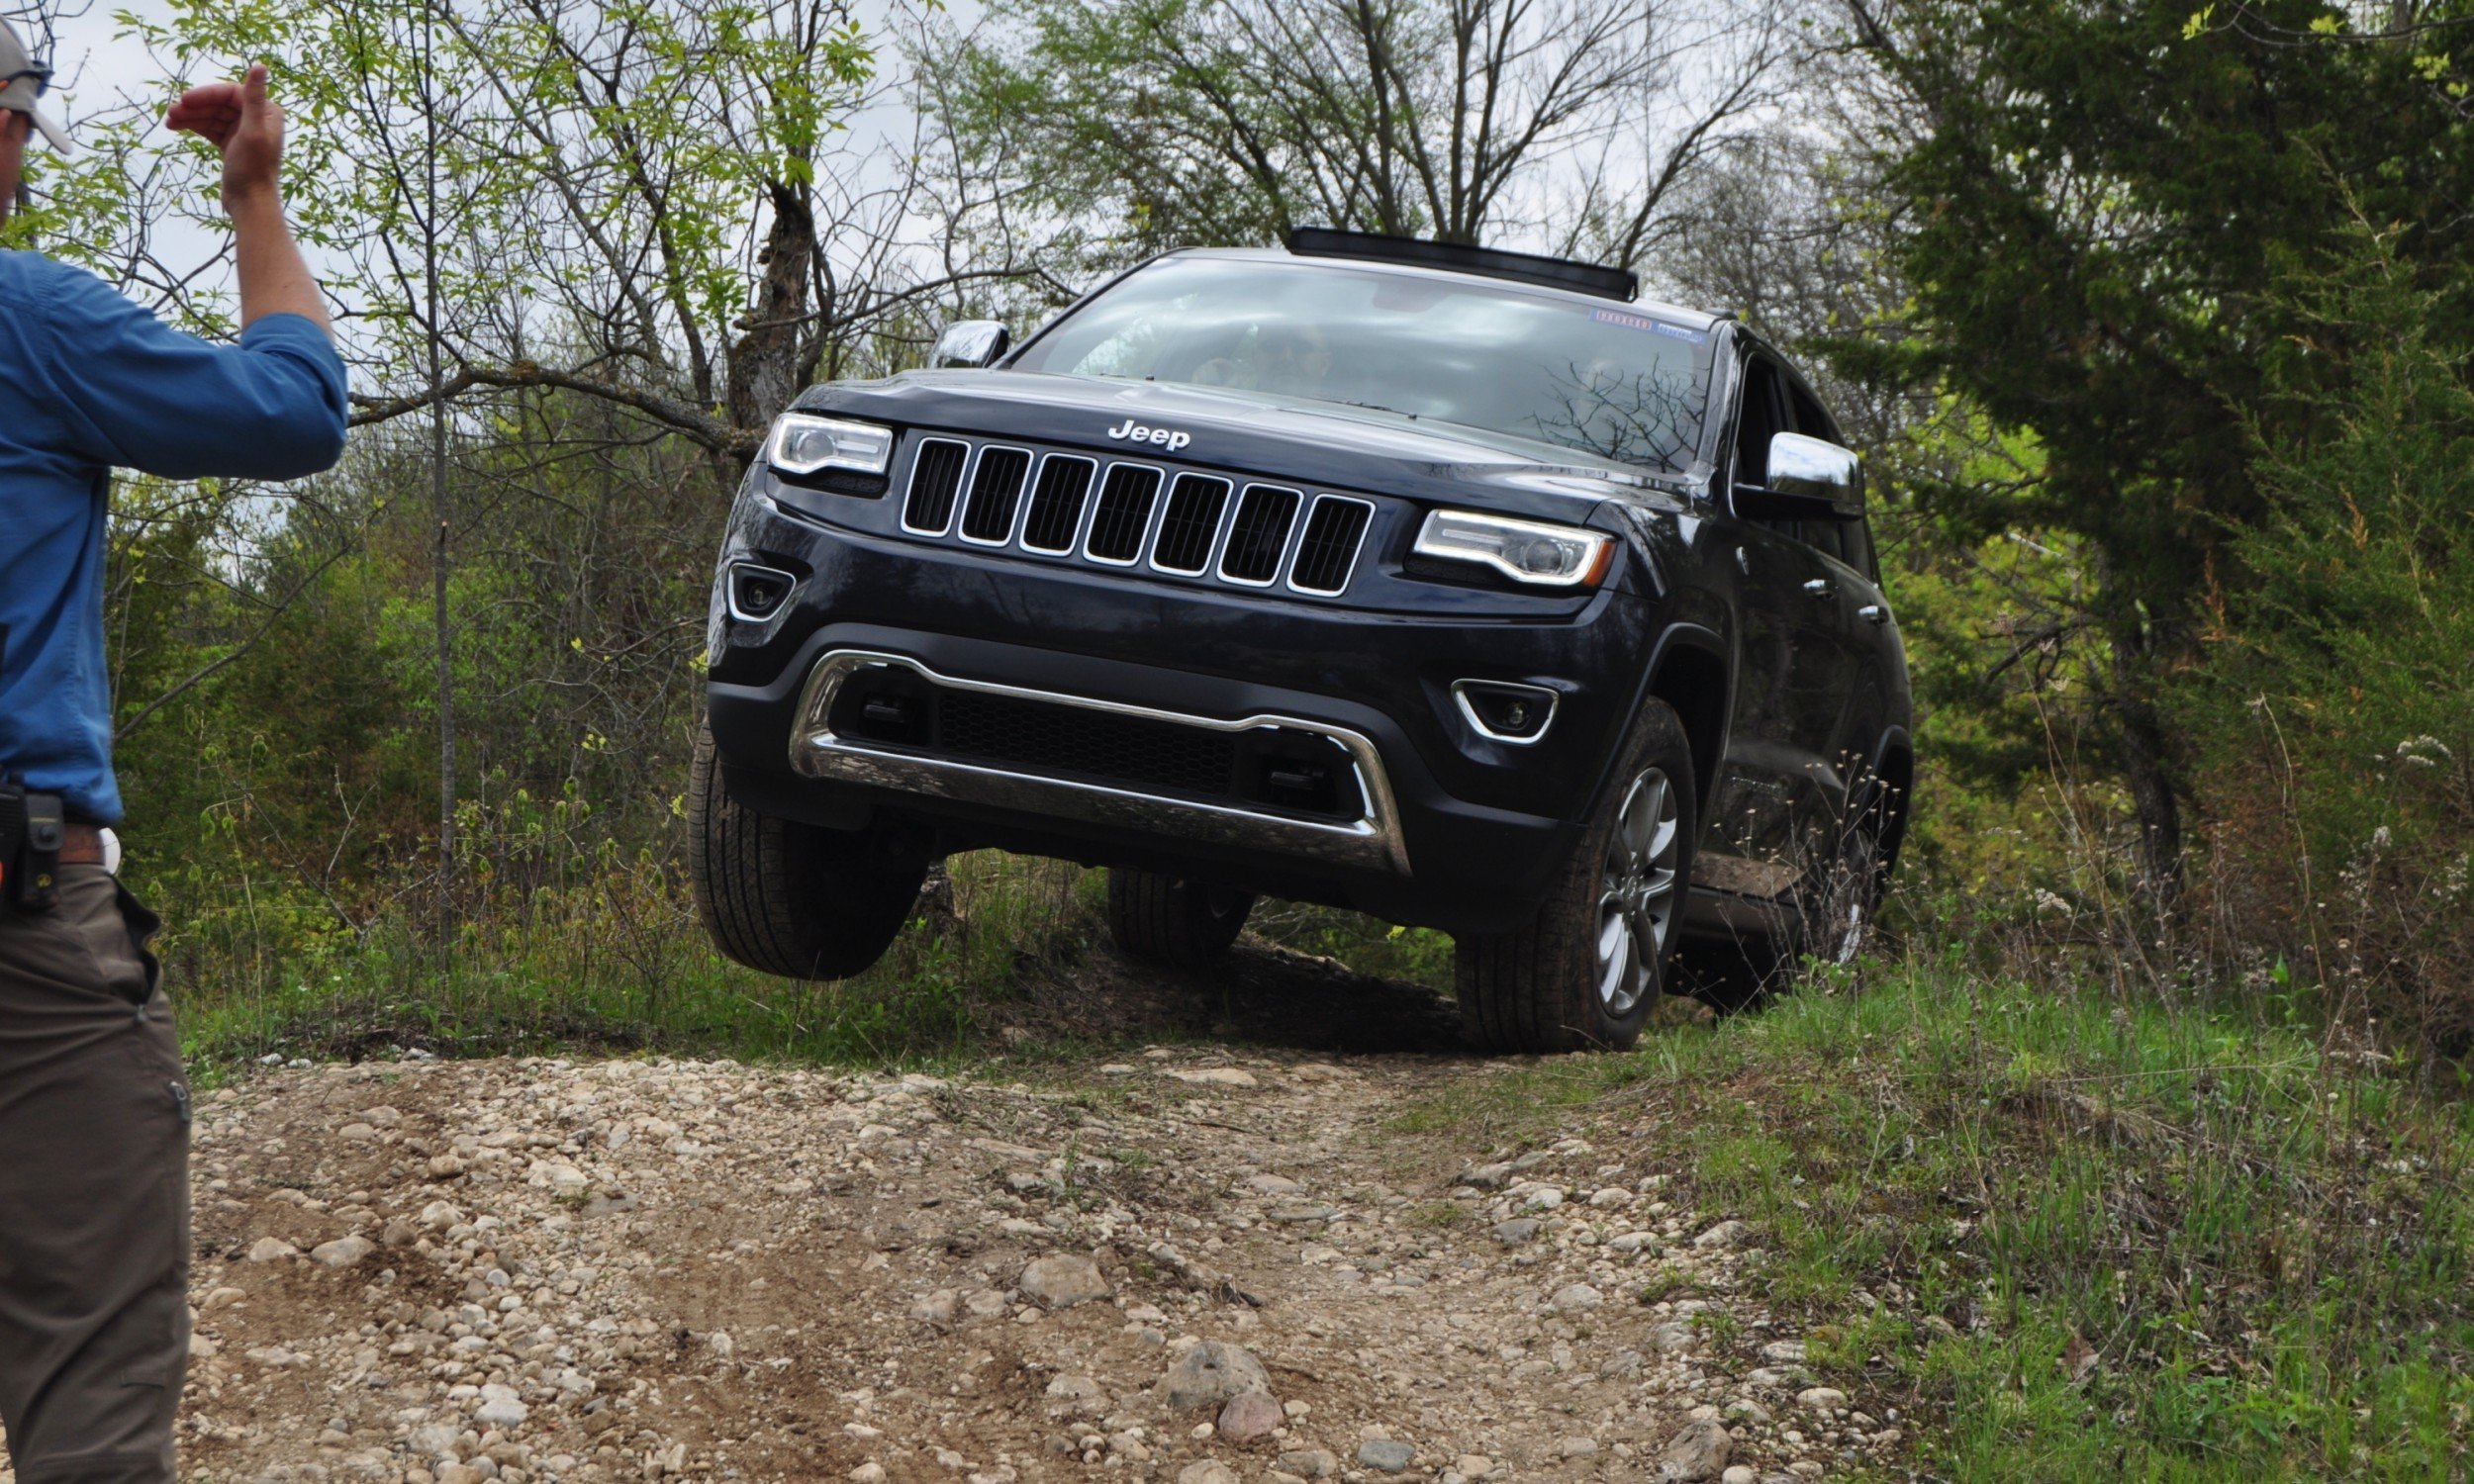 2014-Jeep-Grand-Cherokee-Shows-Its-Trail-Rated-Skills-Off-Road-43.jpg